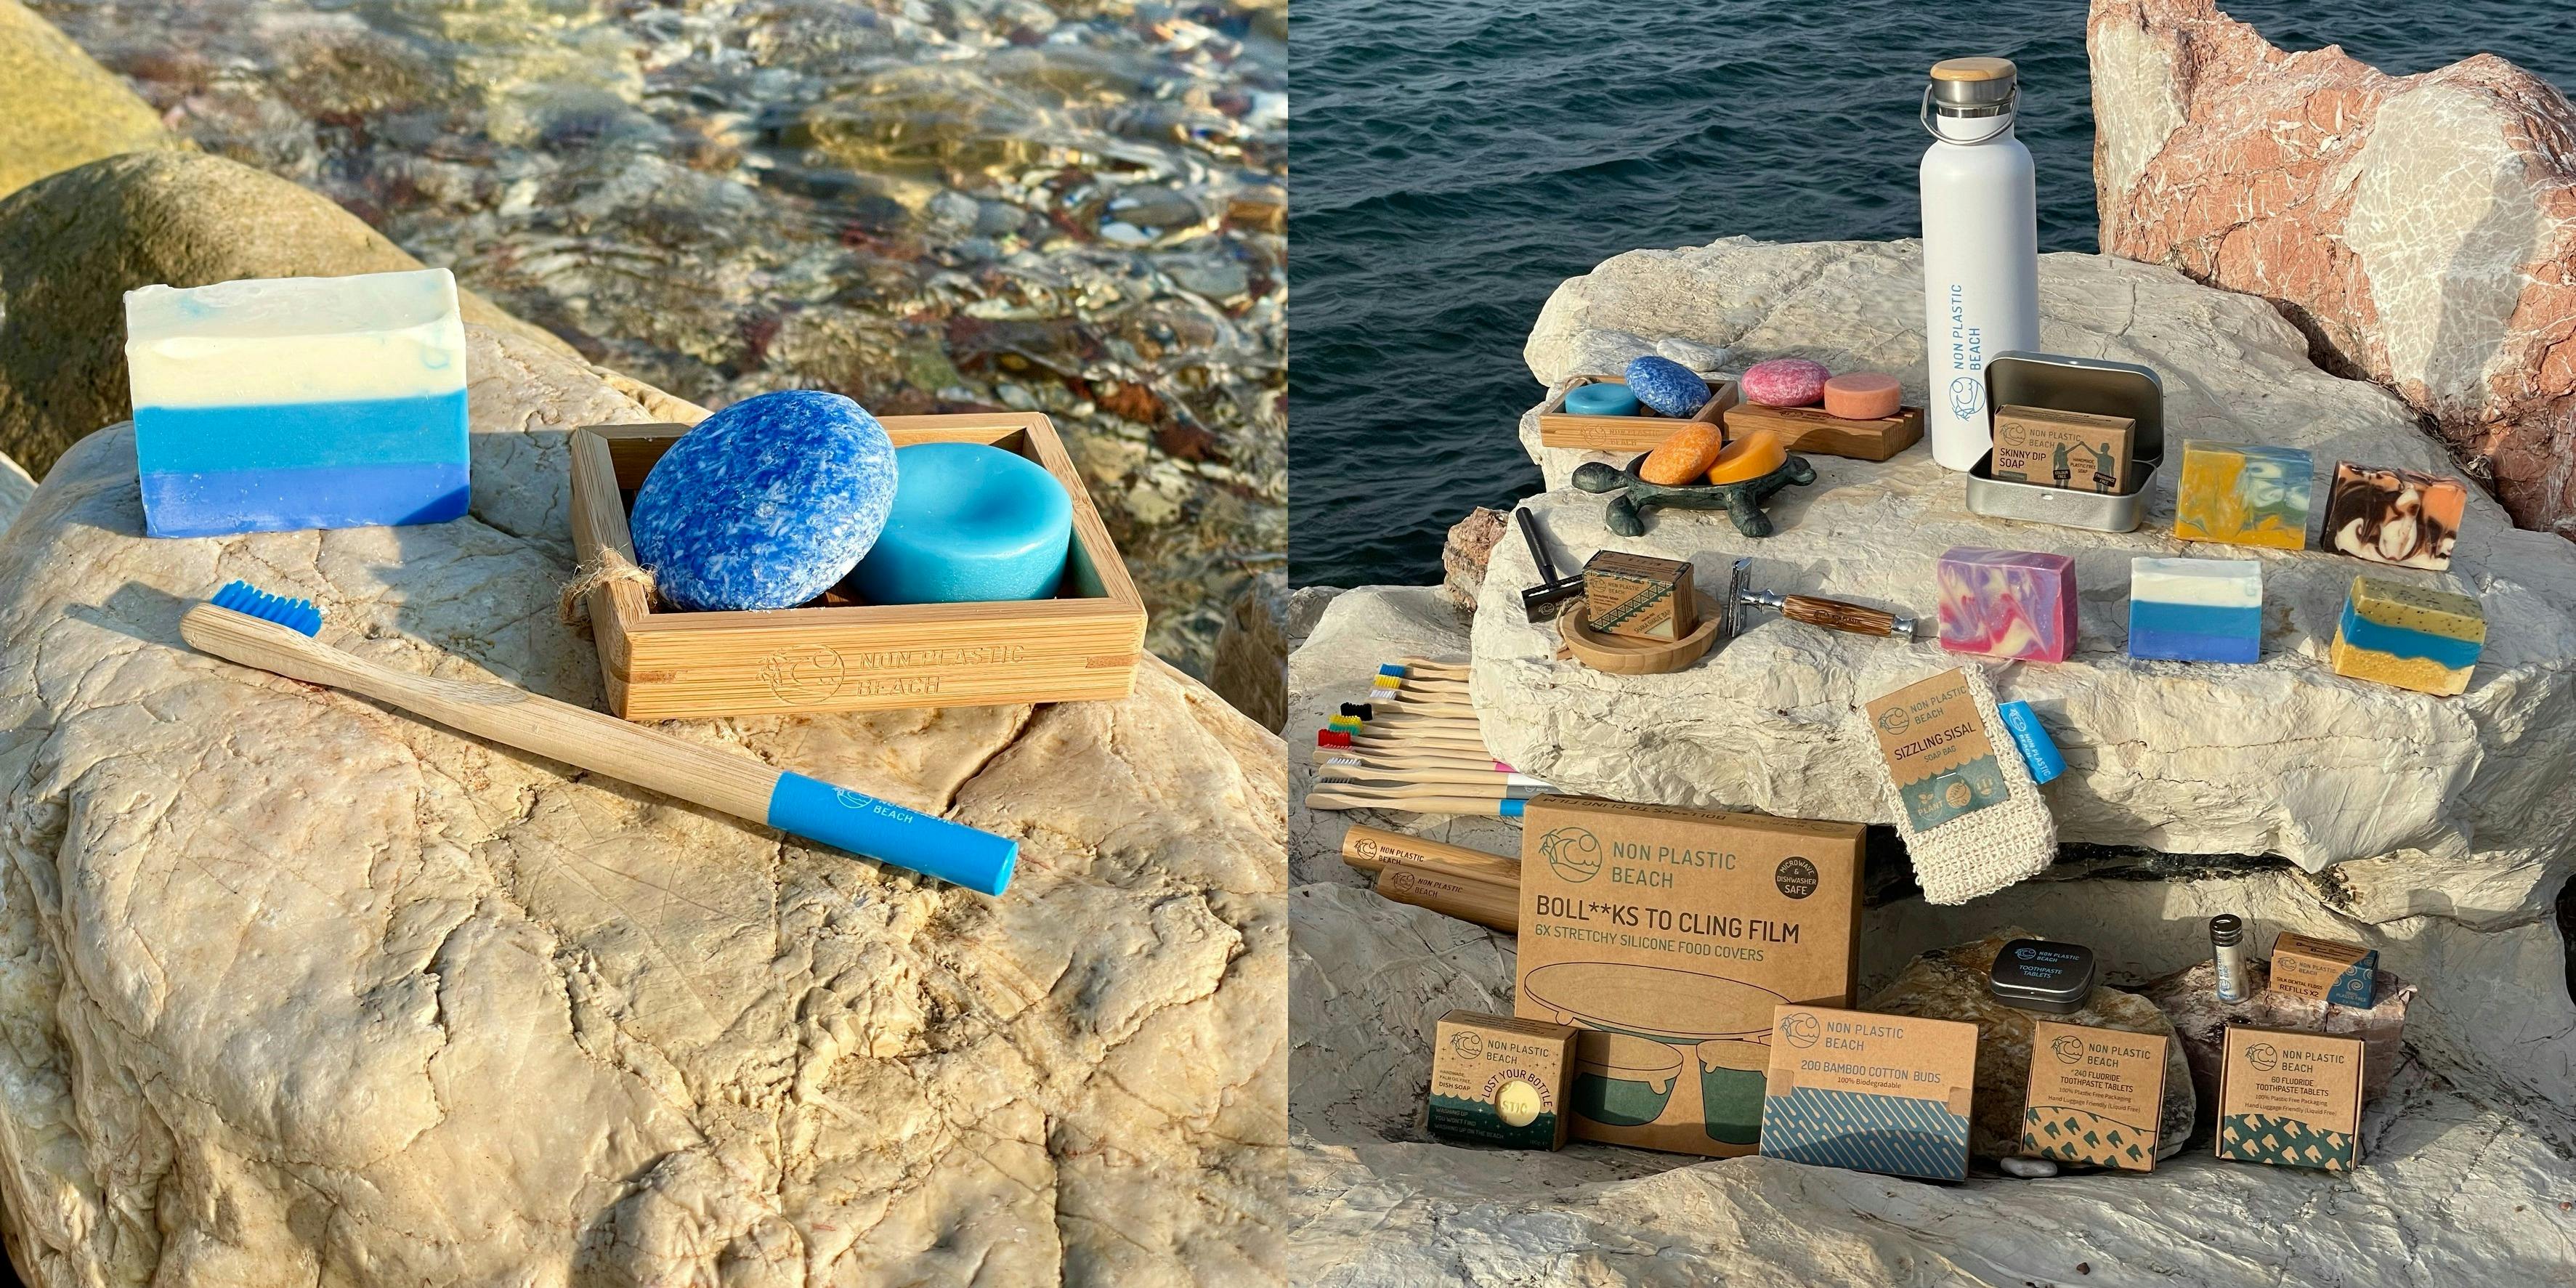 Some Non Plastic Beach products by the sea